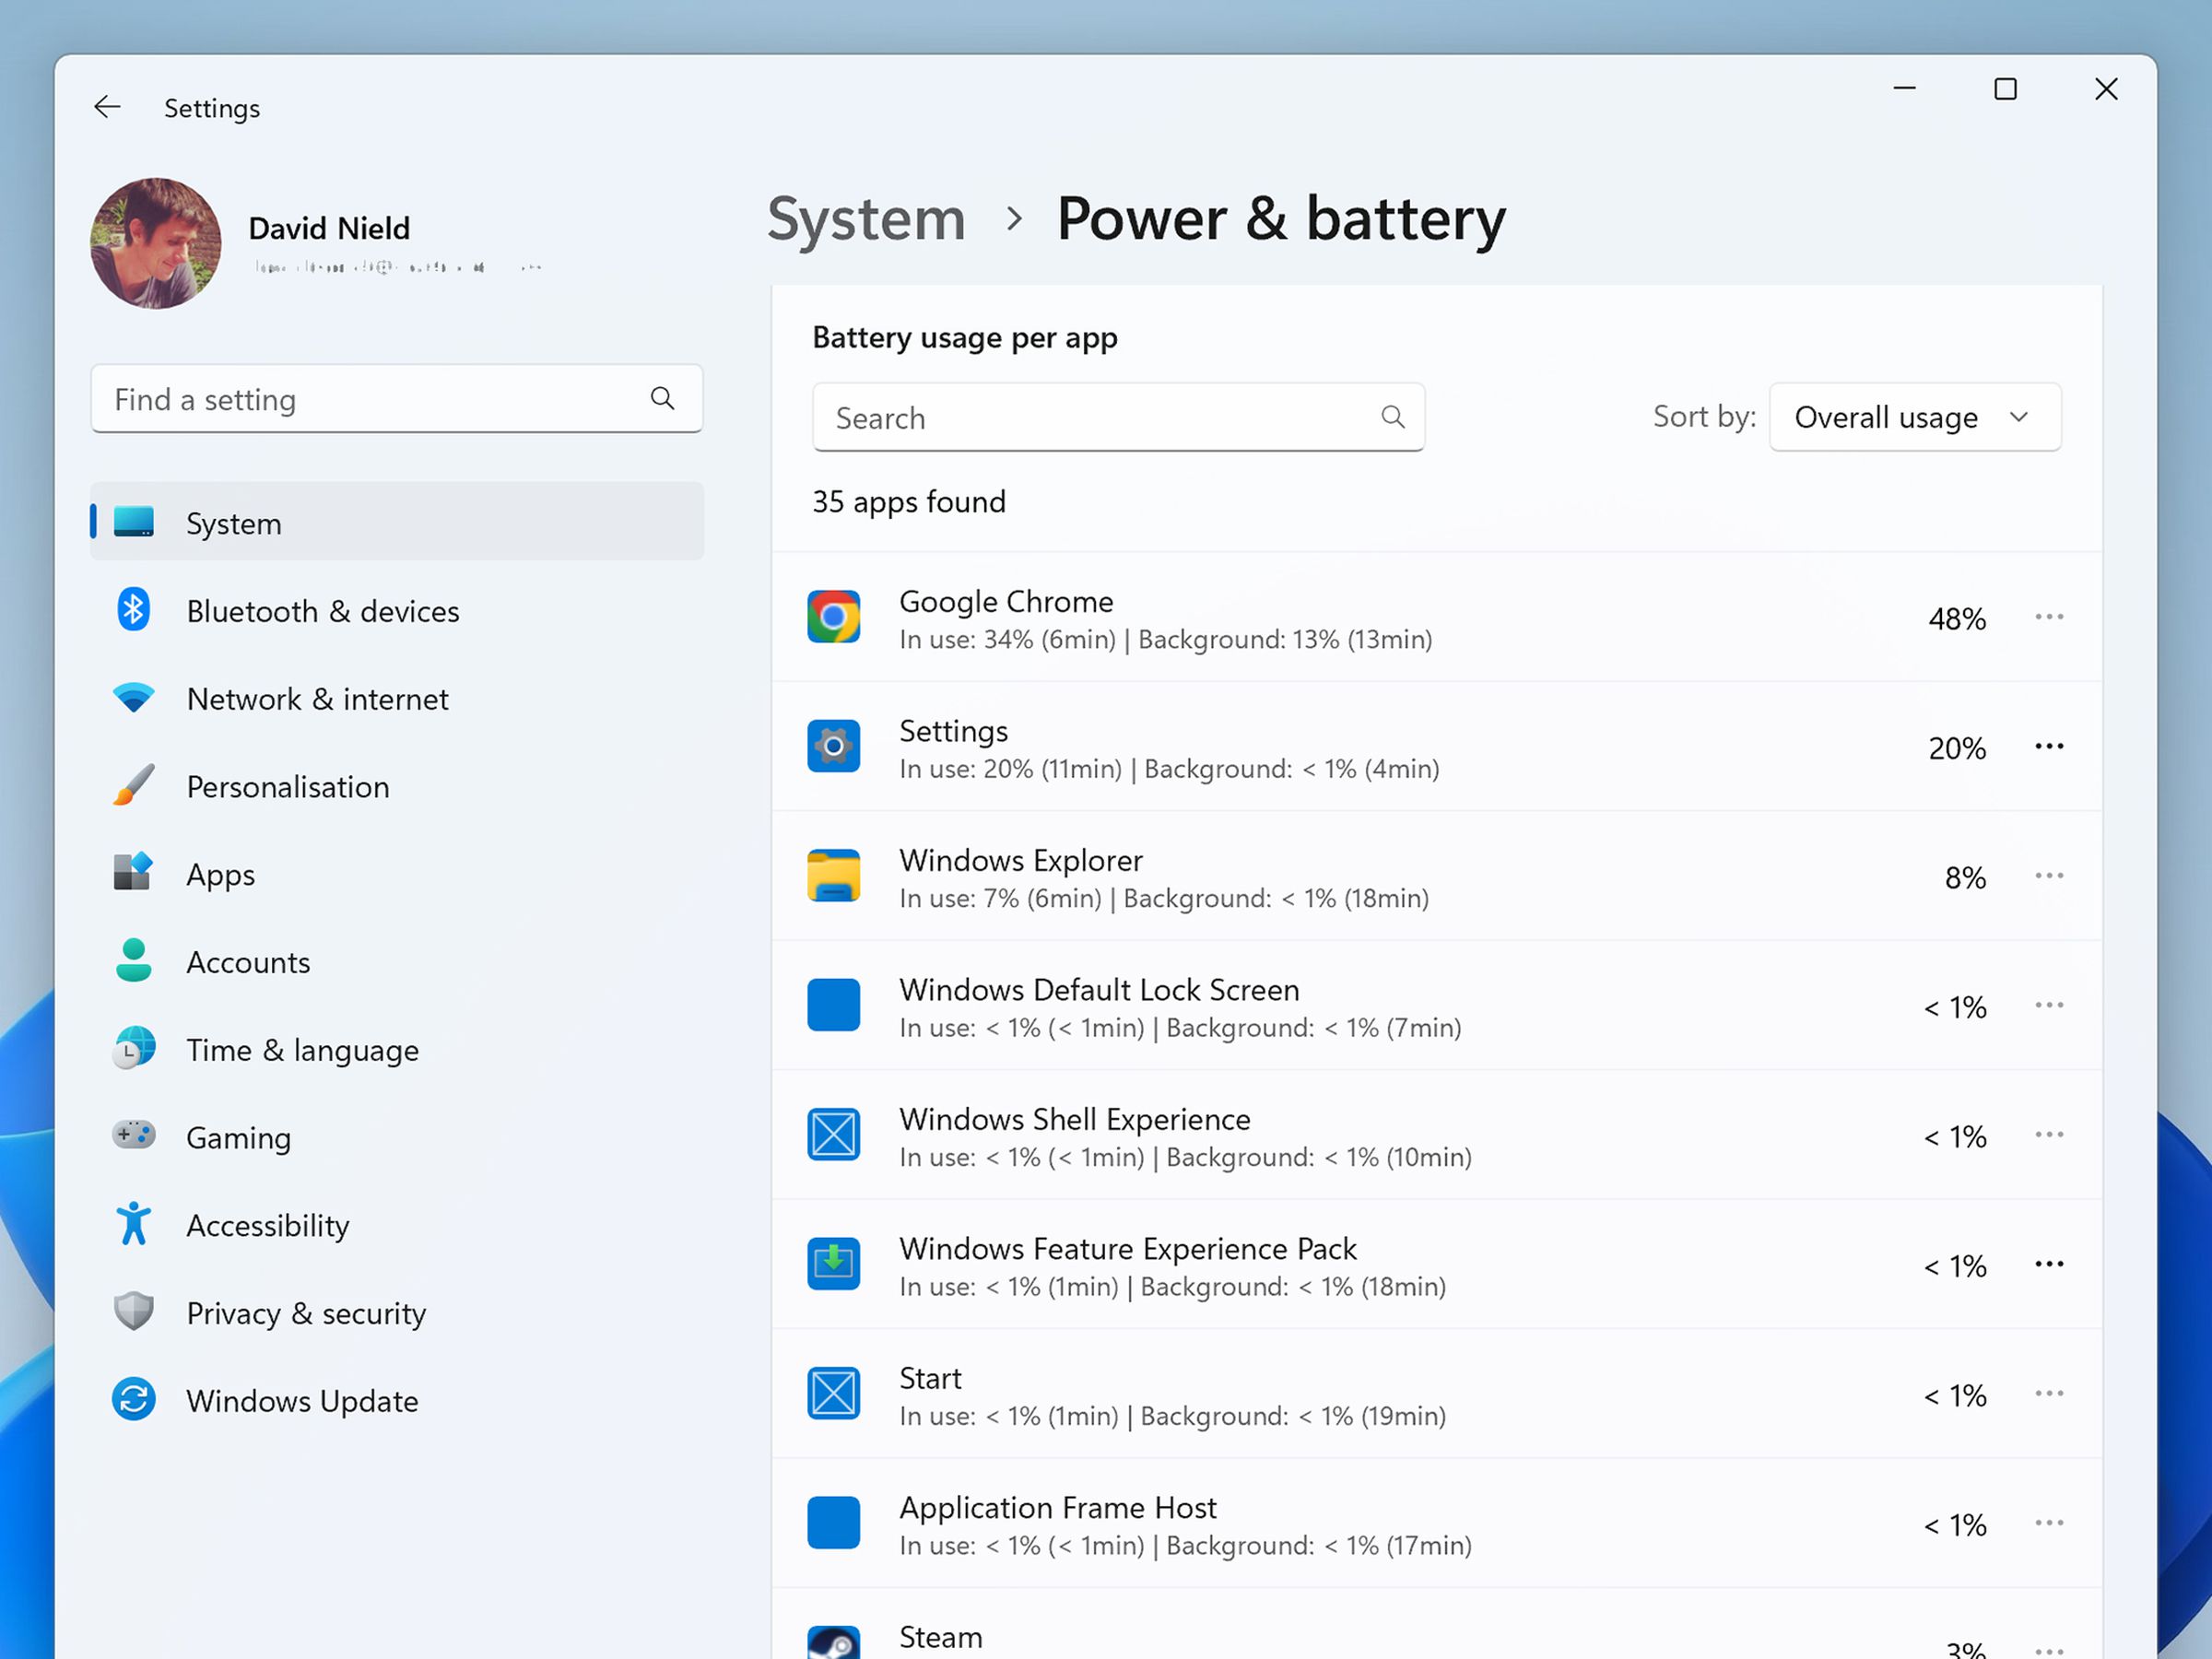 Power &amp; battery settings page on Windows with main menu on left, and list of battery usage per app in center, including app name, how long it’s been in use, and its overall usage percentage.